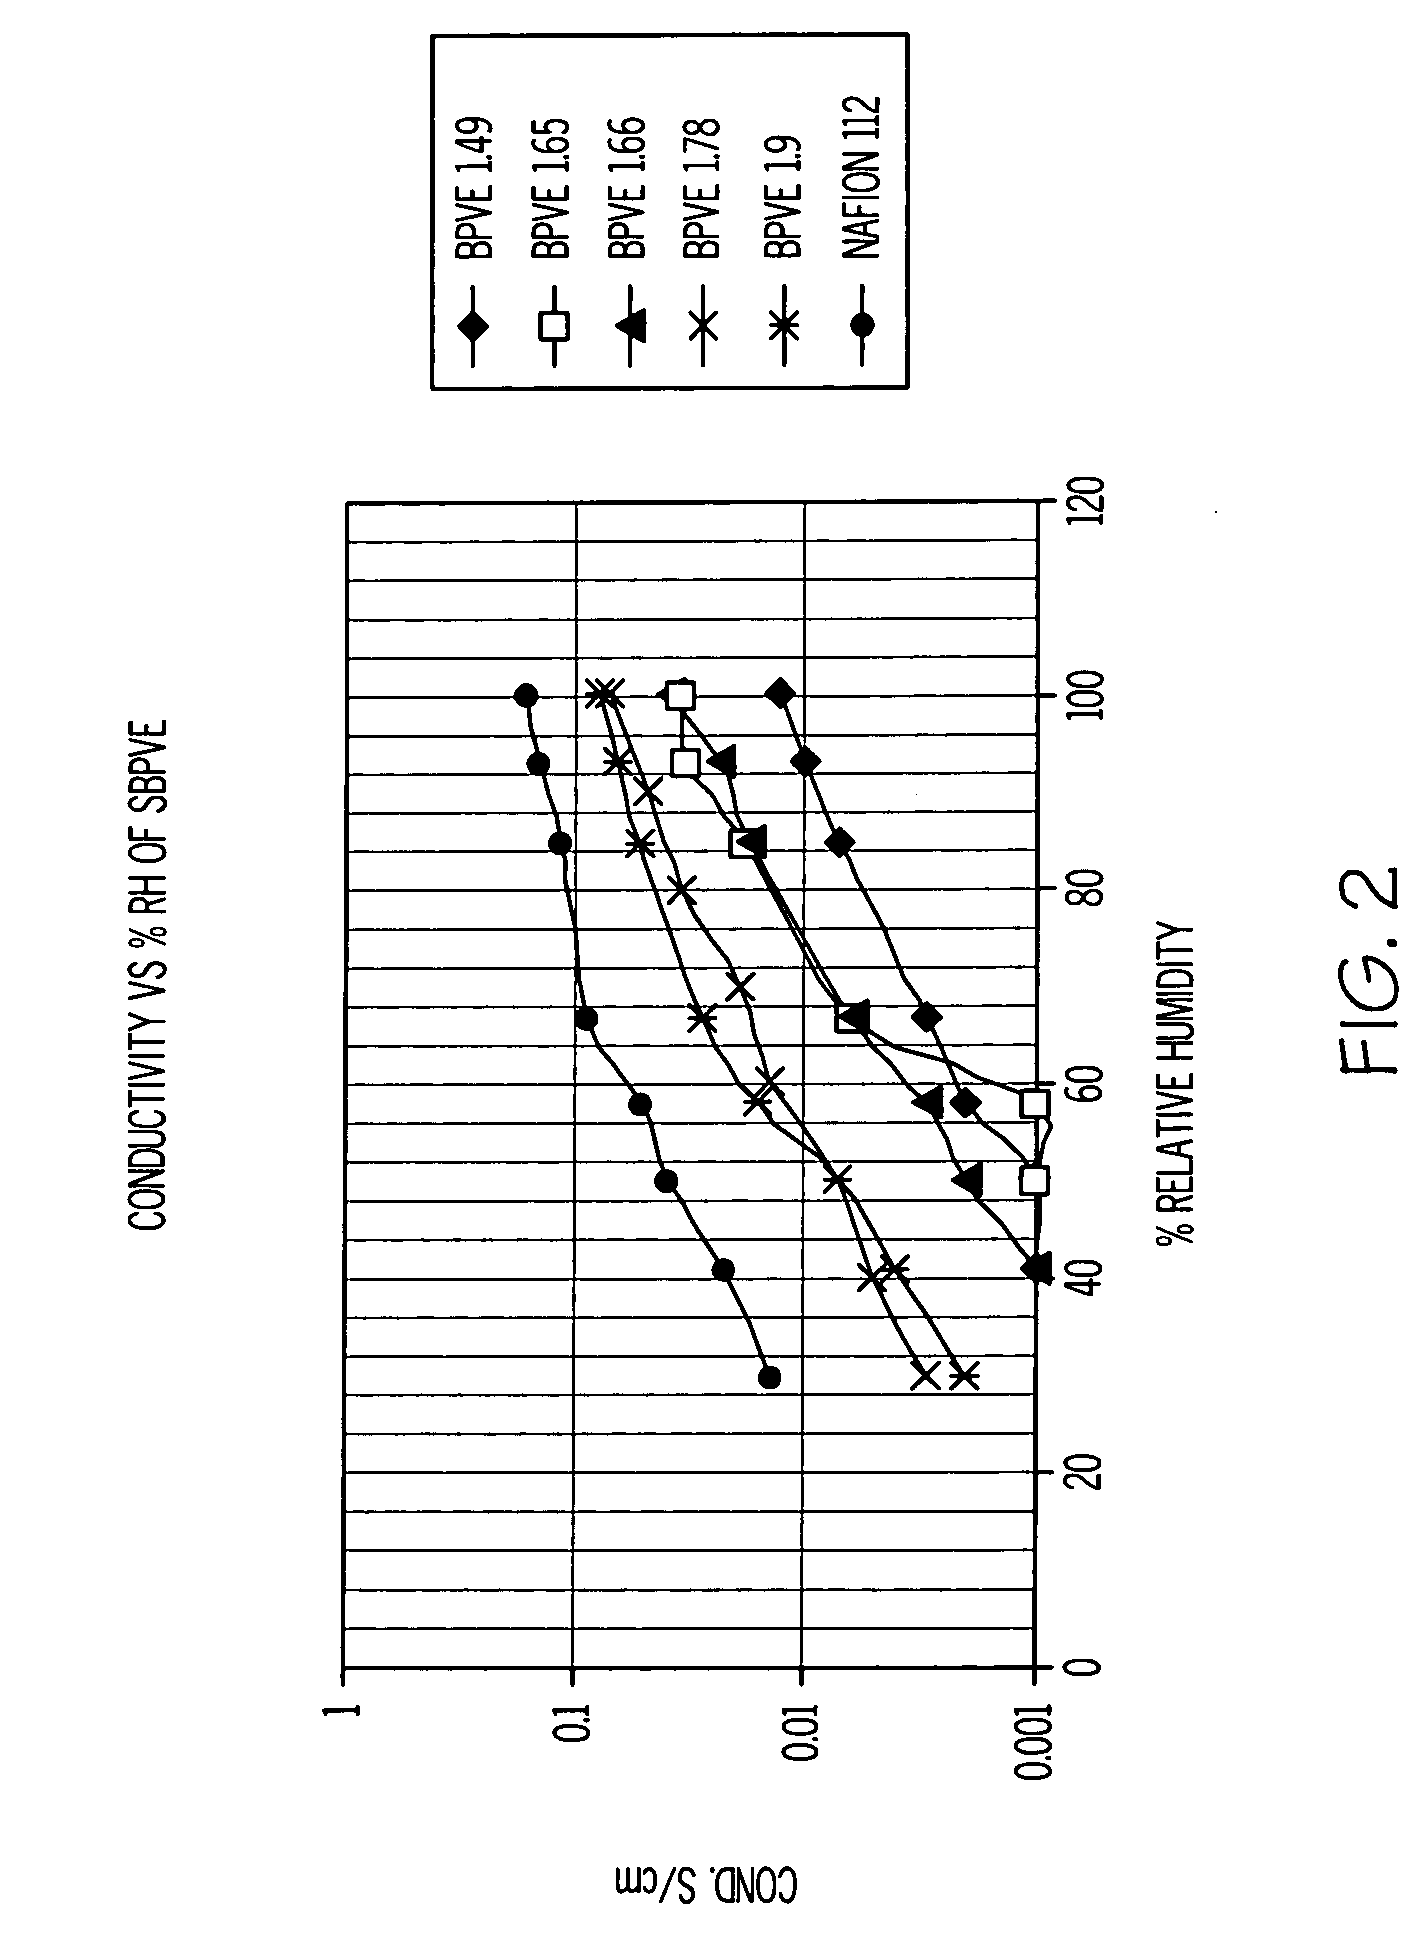 Sulfonated-perfluorocyclobutane polyelectrolyte membranes for fuel cells